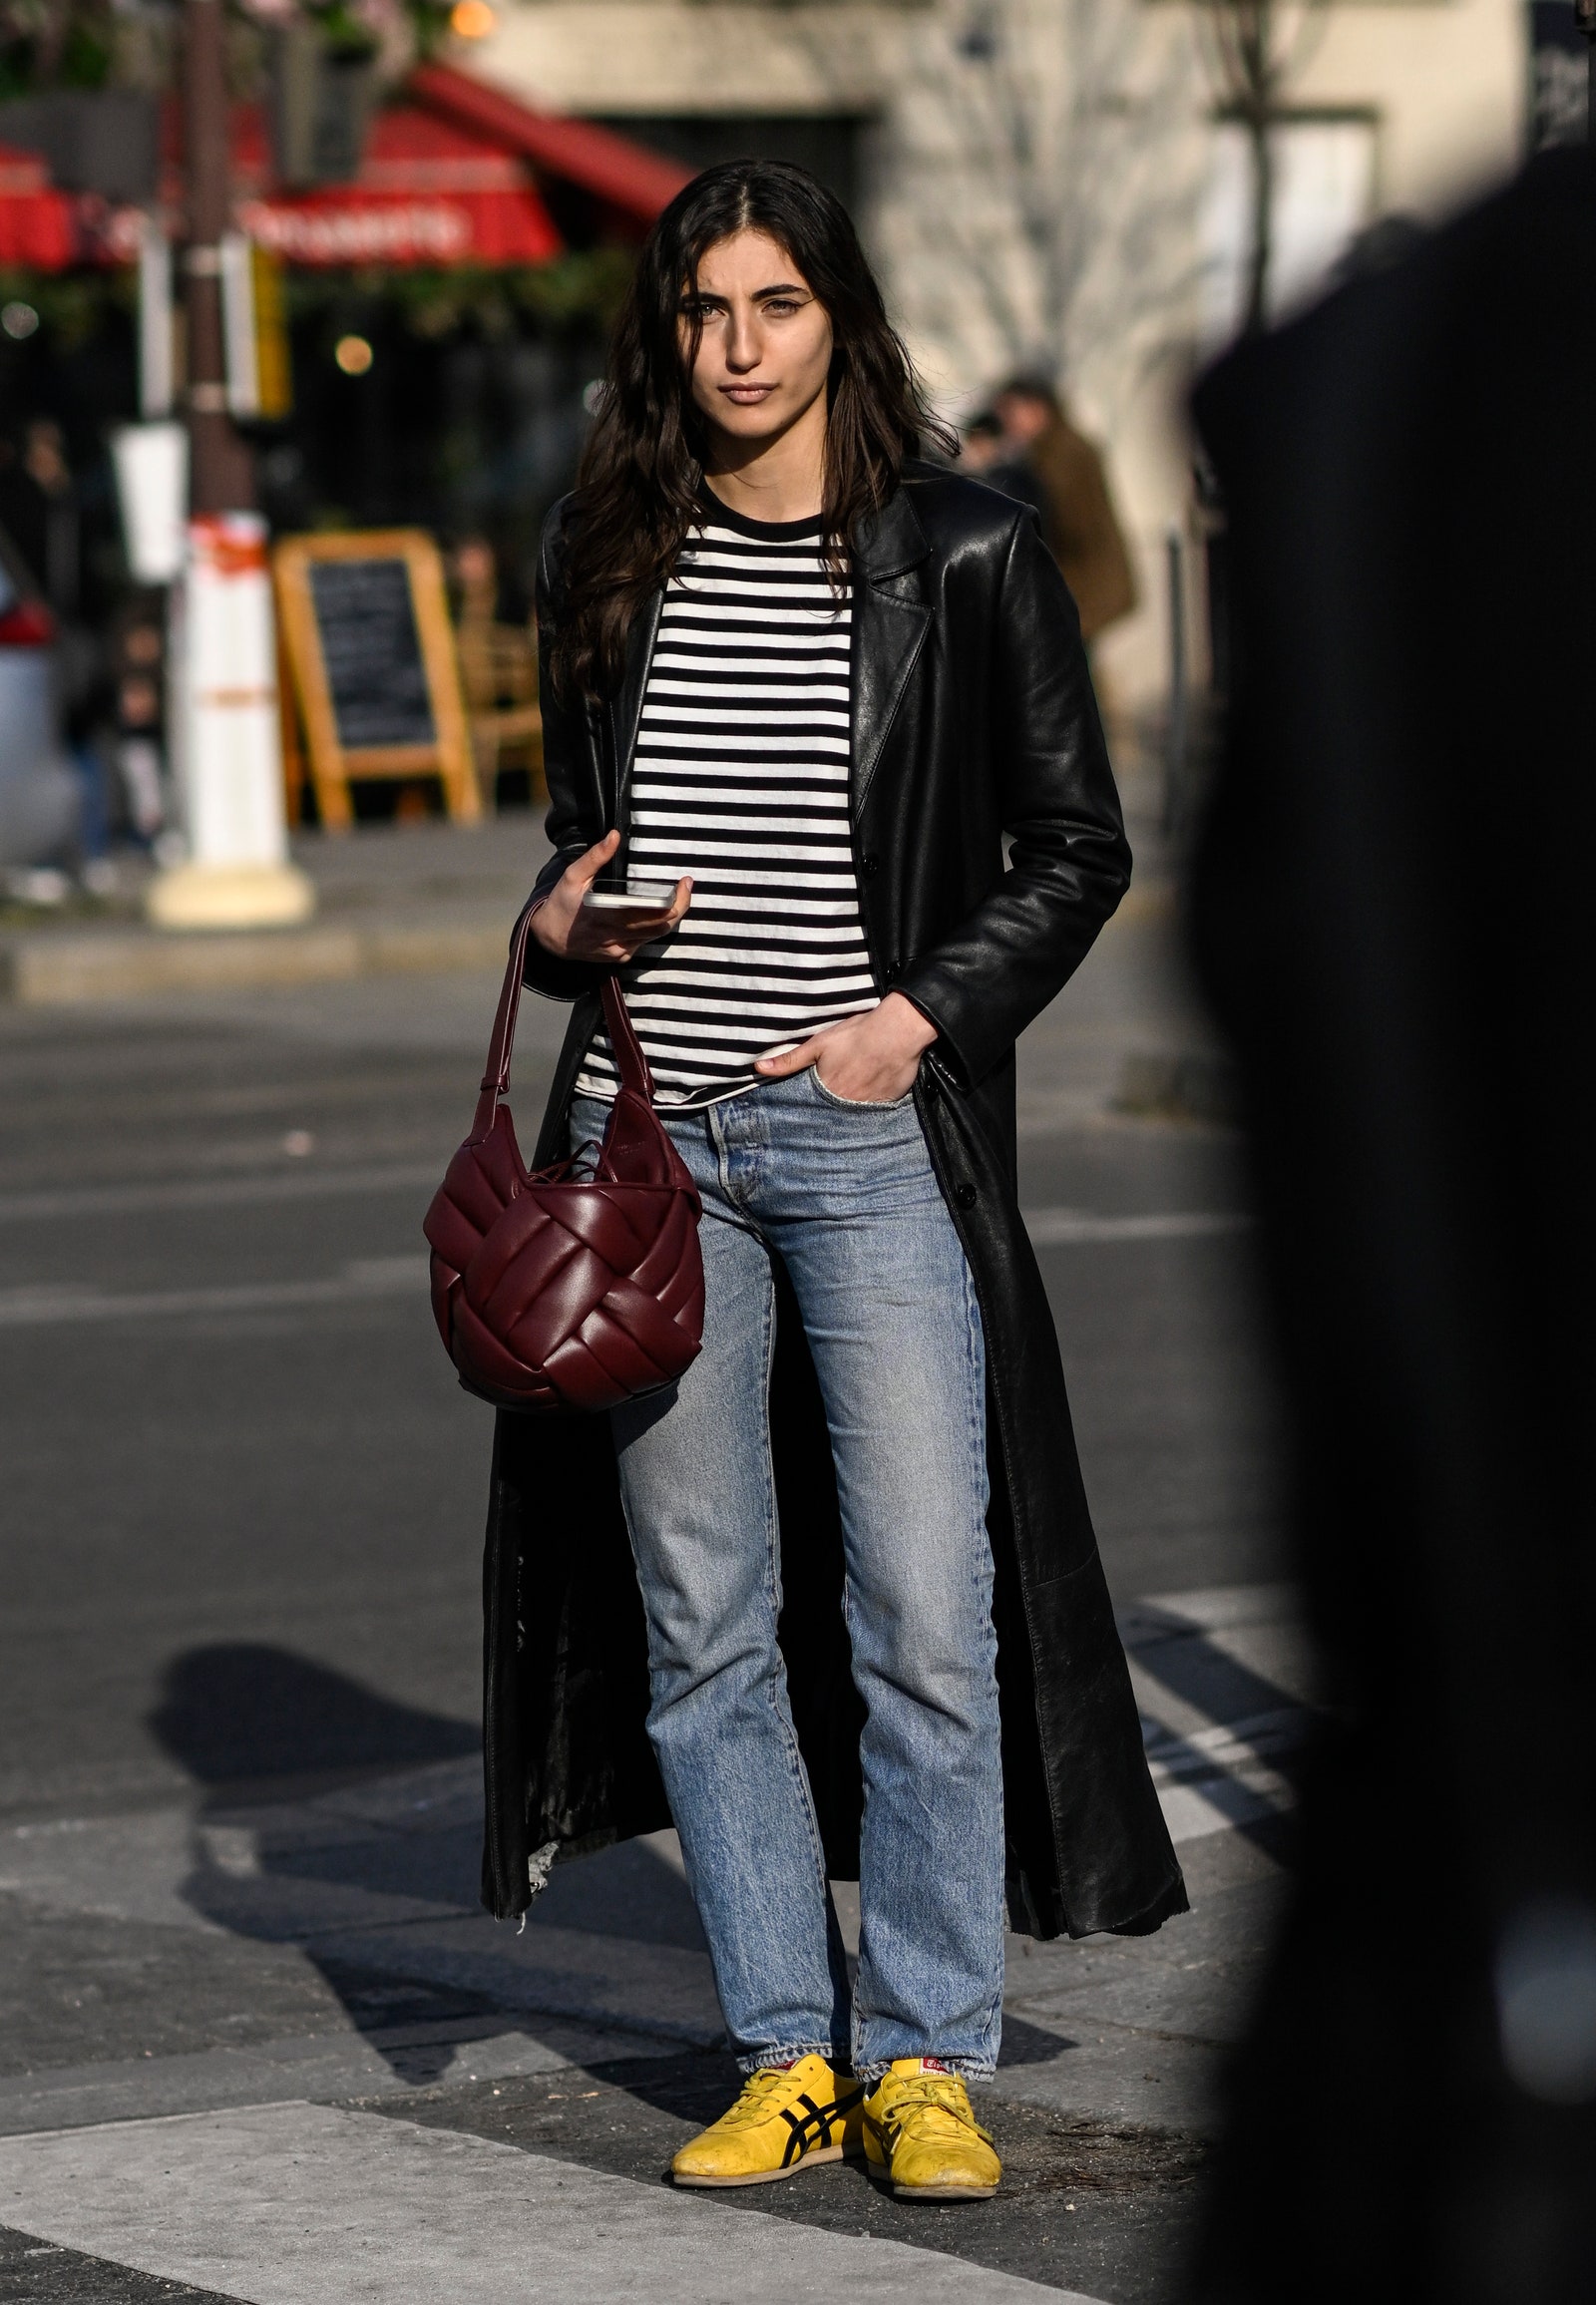 PARIS FRANCE  MARCH 01 A model is seen wearing a black leather coat black and white striped shirt blue jeans and yellow...